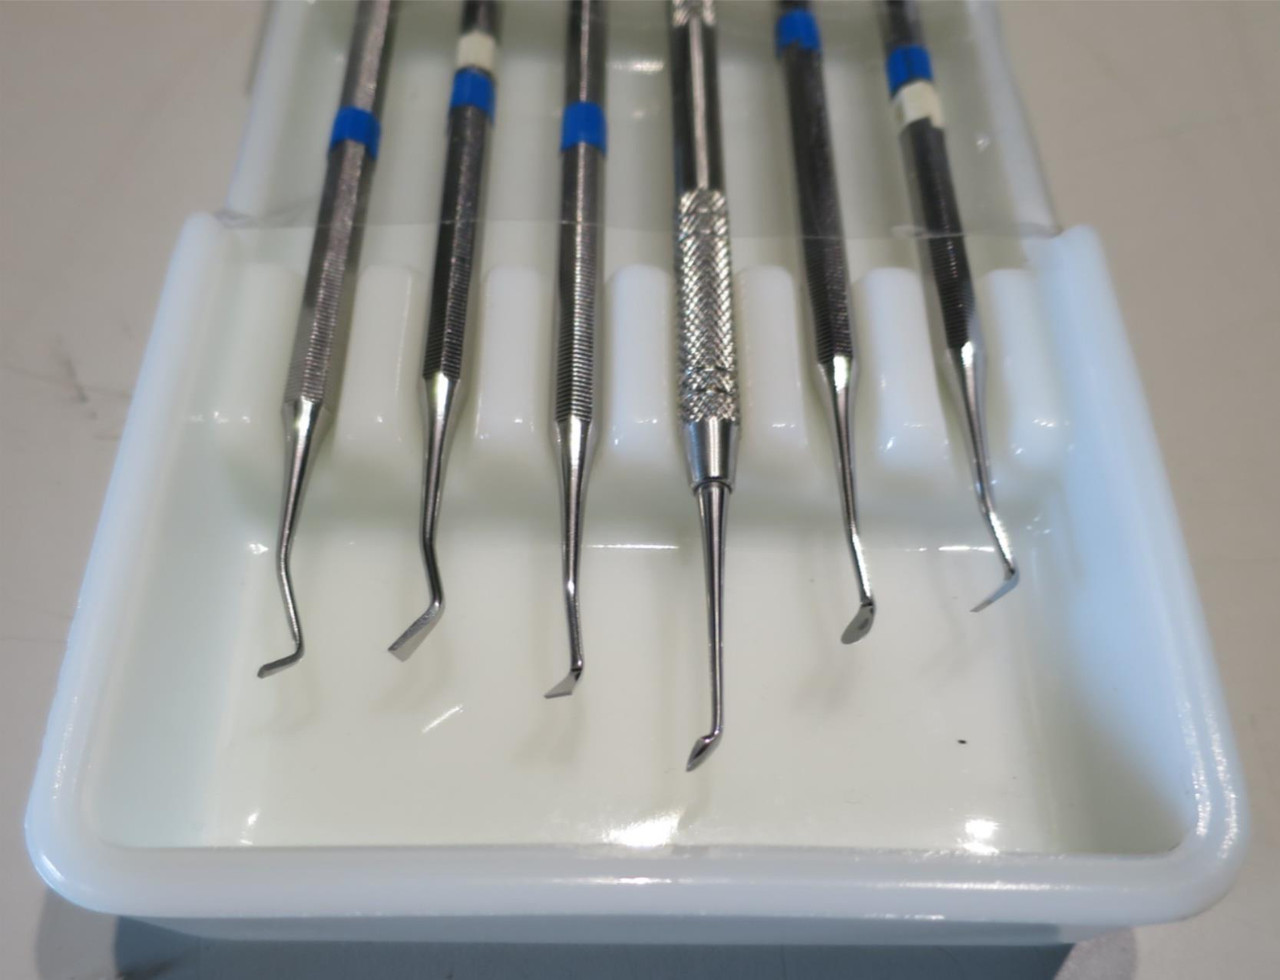 Set of 6 Stainless Steel  Dental Walls Instruments in Antique Milk Glass Tray